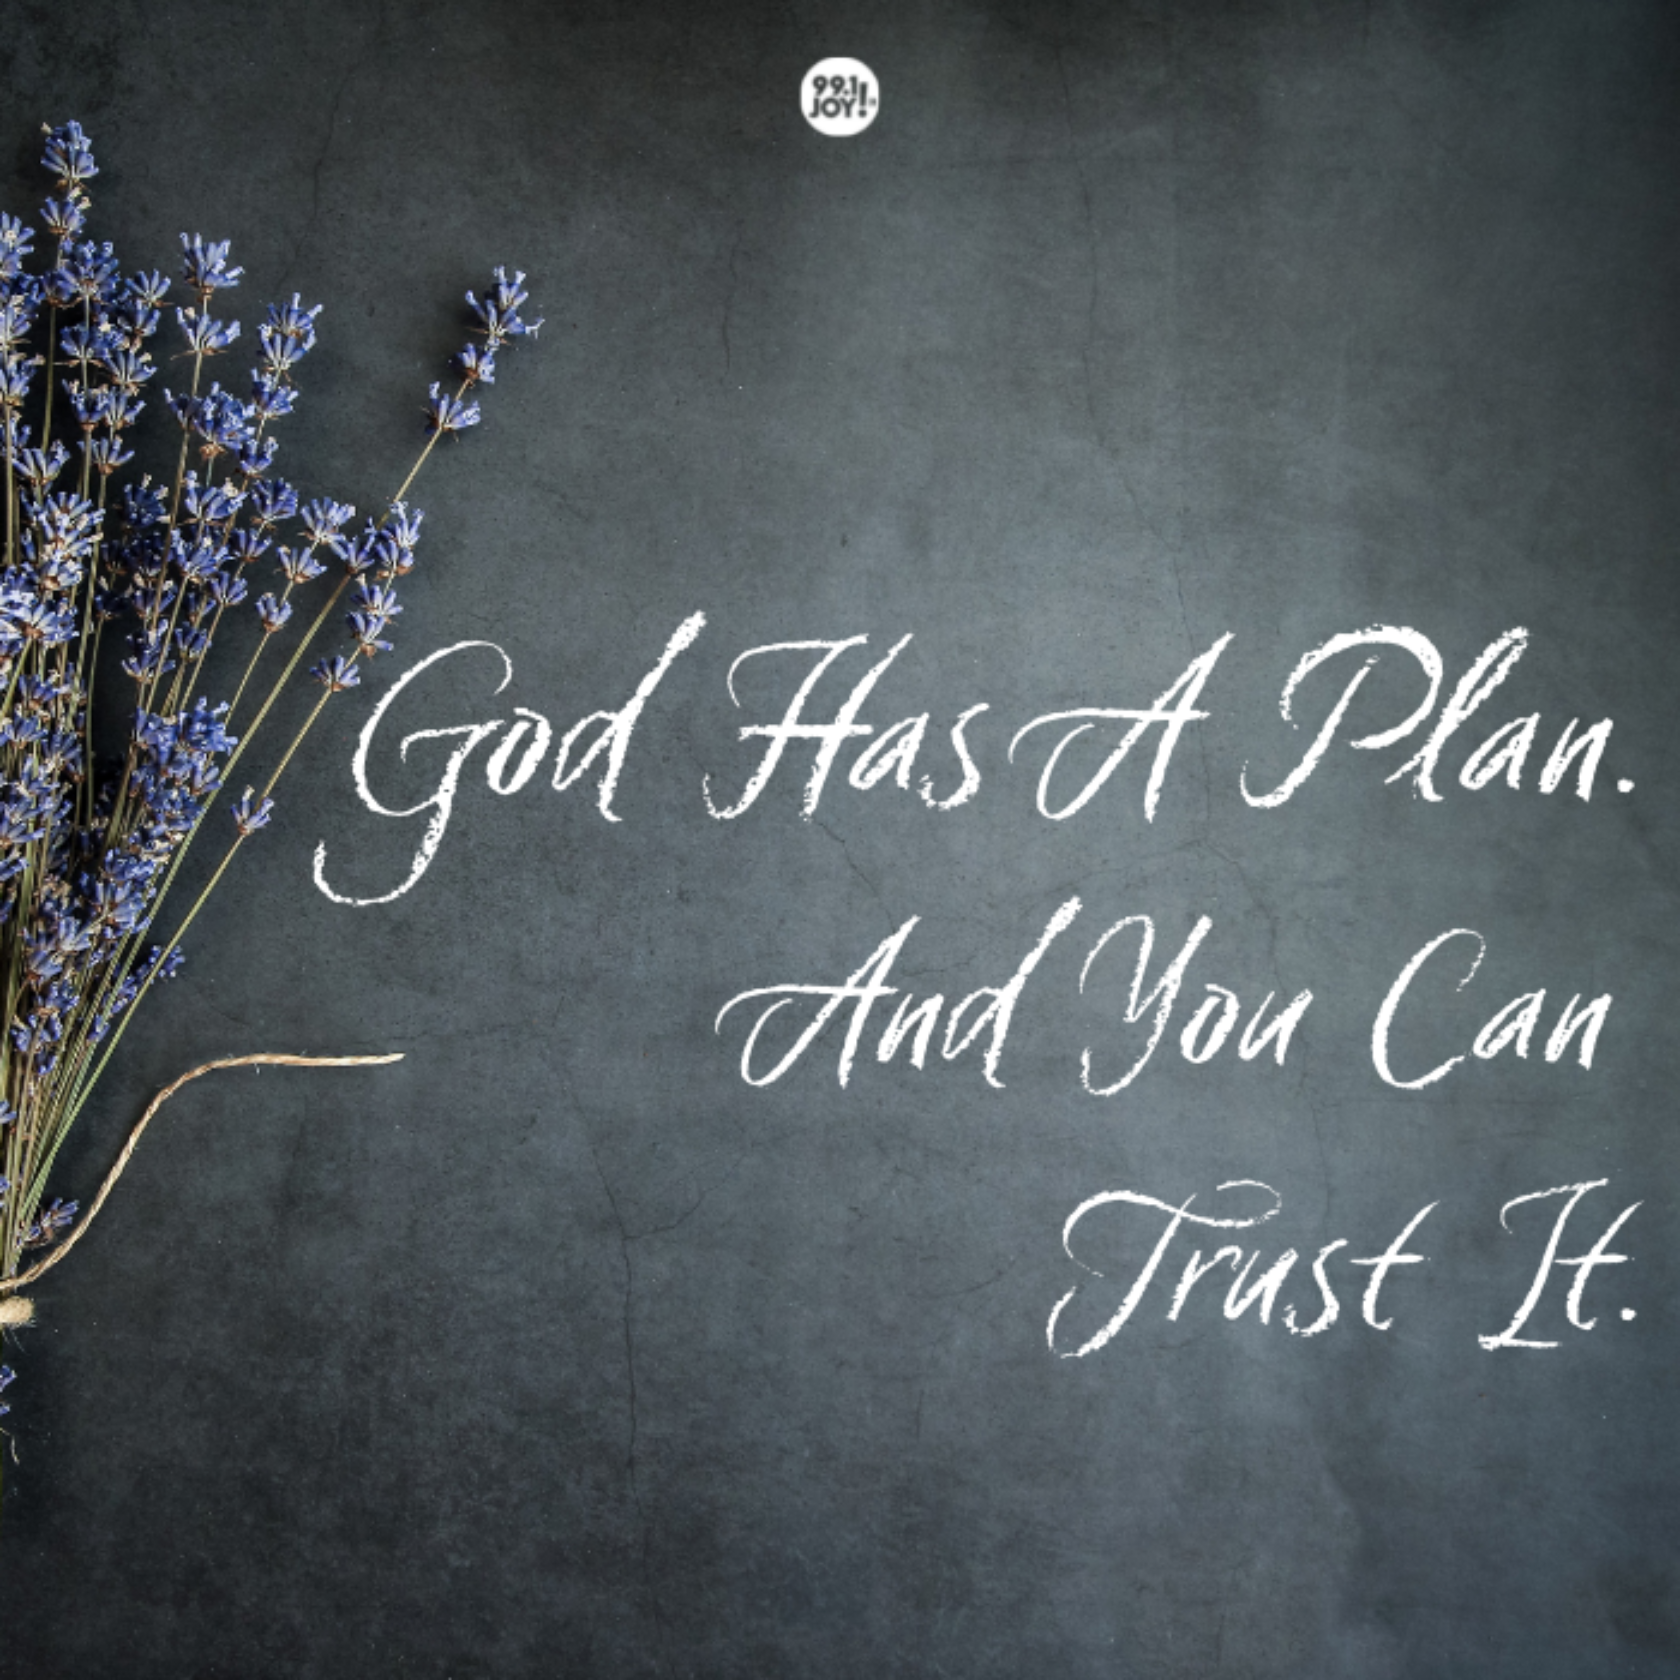 God Has A Plan. And You Can Trust It.